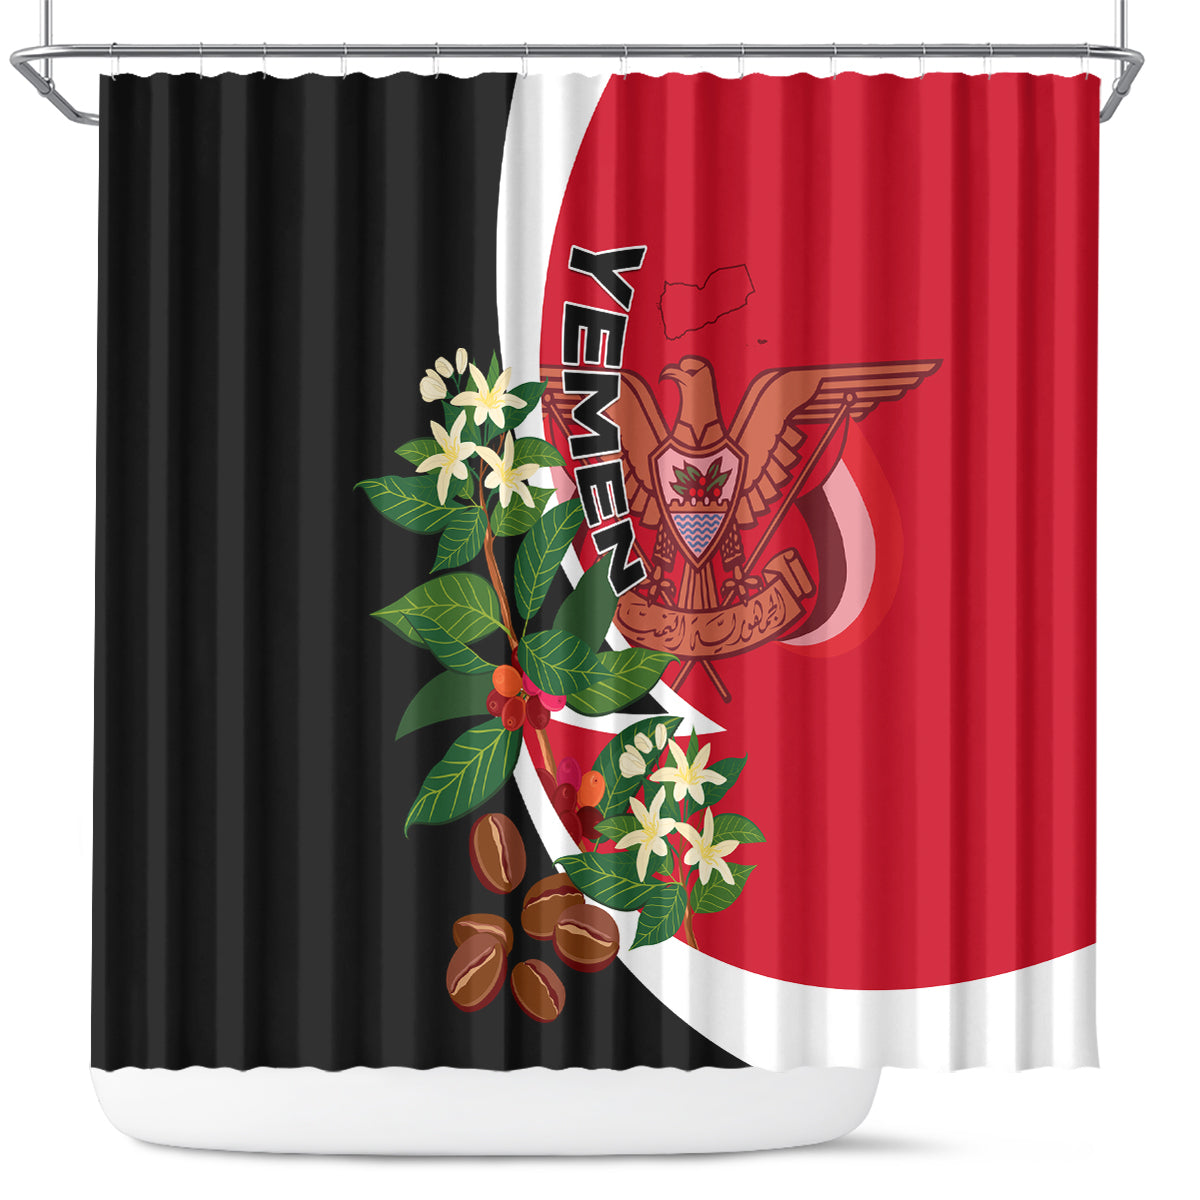 Yemen Unification Day 2024 Shower Curtain May 22 Unity Day Flag Style